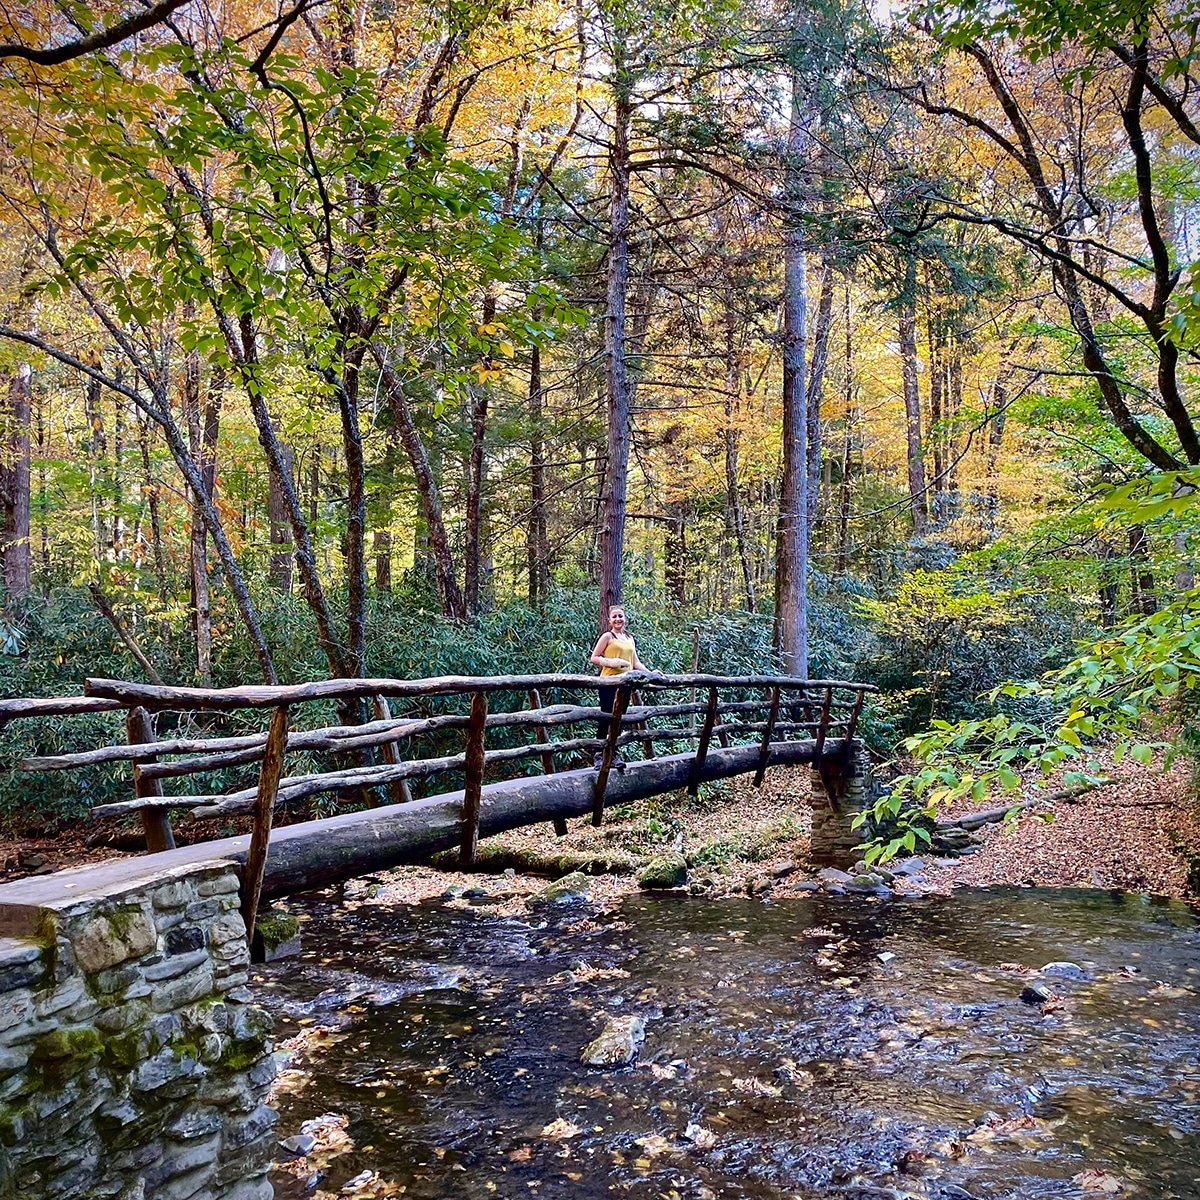 Annie standing on a narrow log bridge built over a river in the Cataloochee Valley in the Great Smokey Mountains National Park.